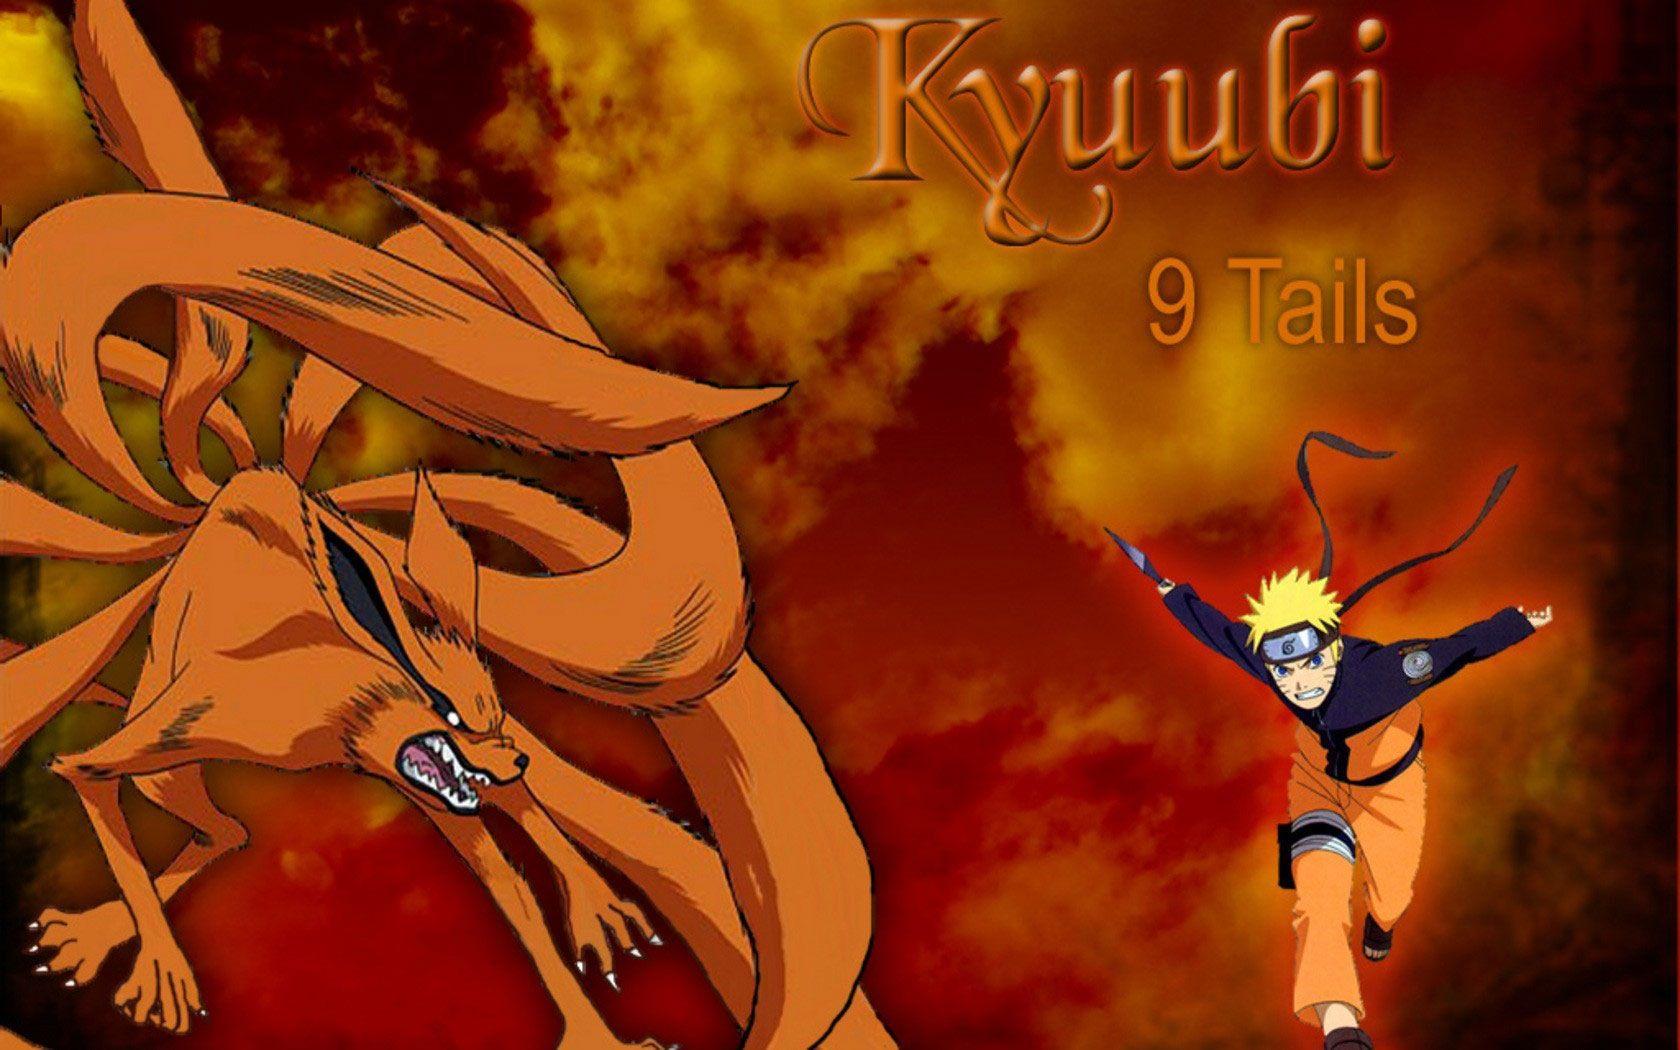 Naruto tailed beasts; The Nine Tails, Kurama. It's most recent